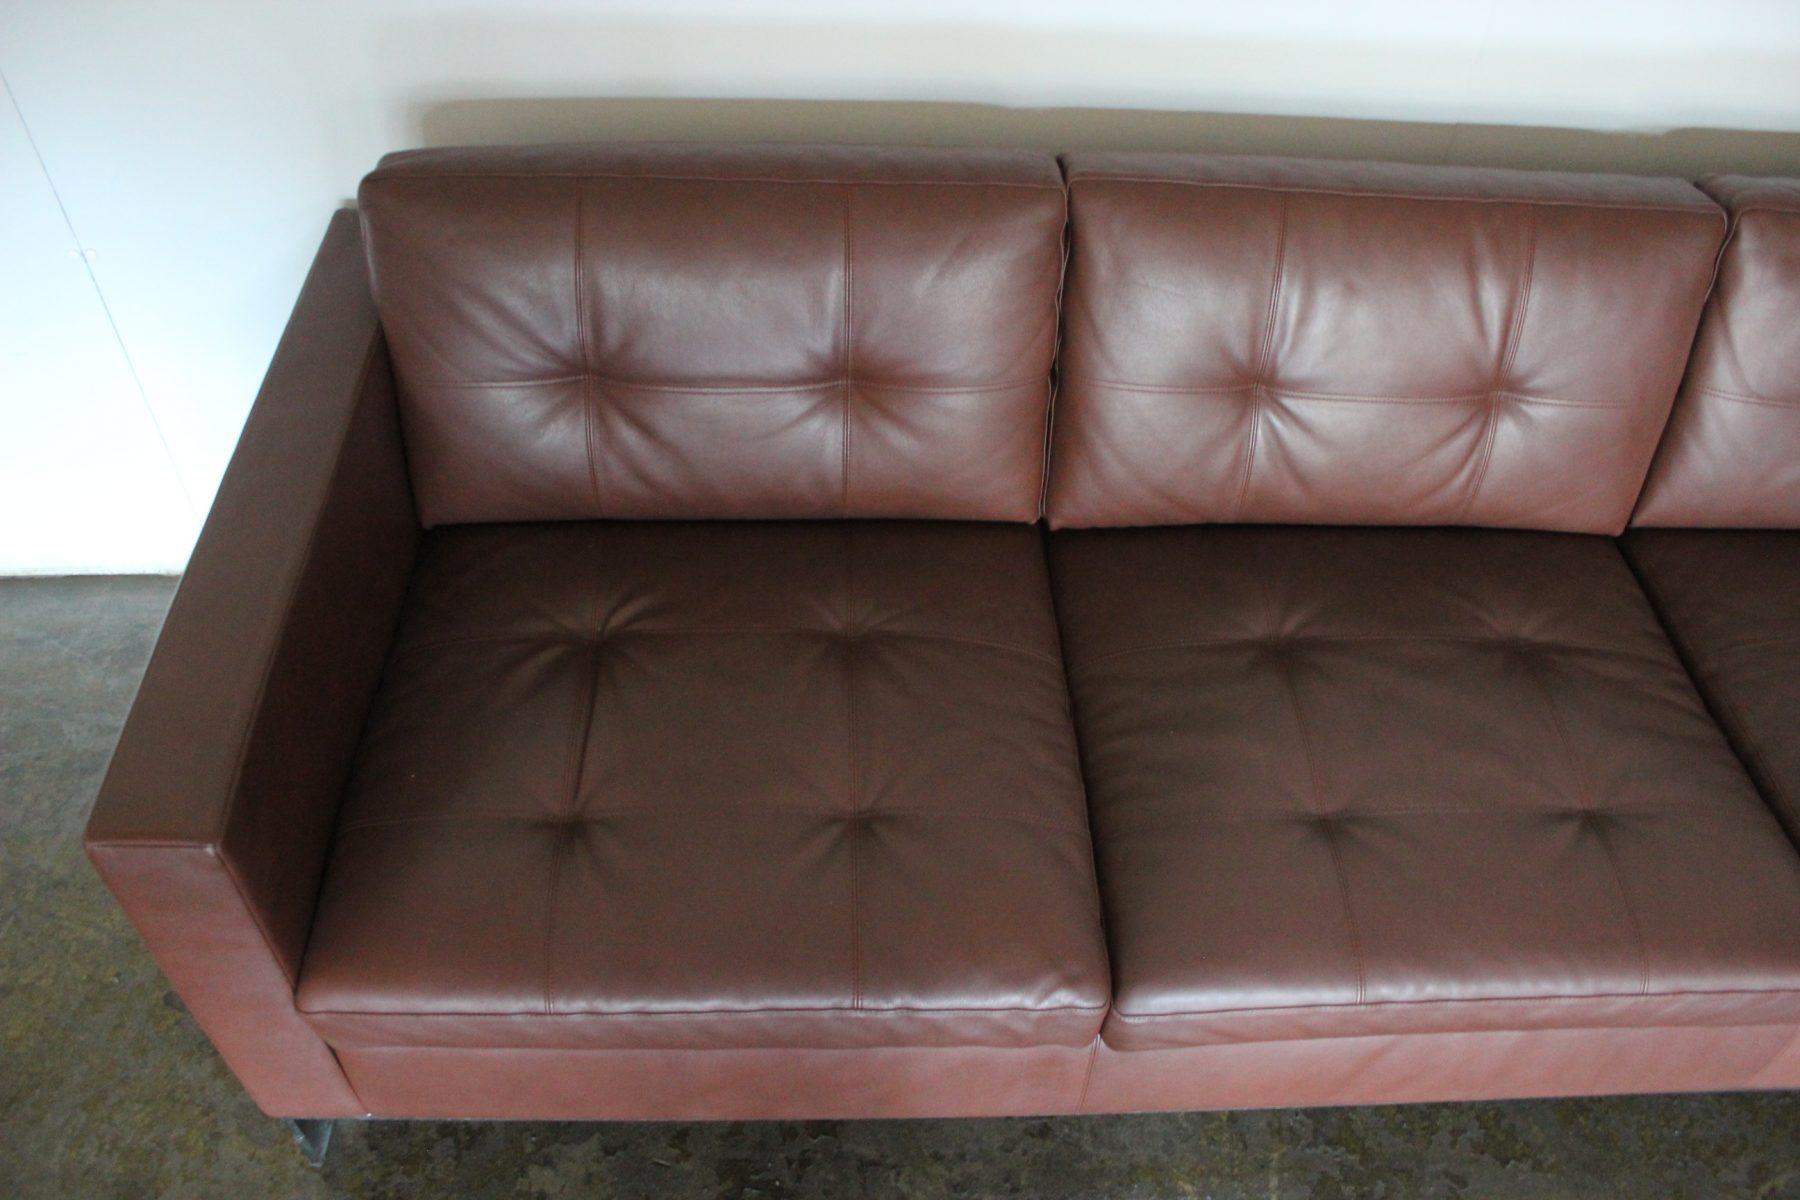 Walter Knoll “Foster 502.30” 3-Seat Sofa – In Dark Brown Leather For Sale 4